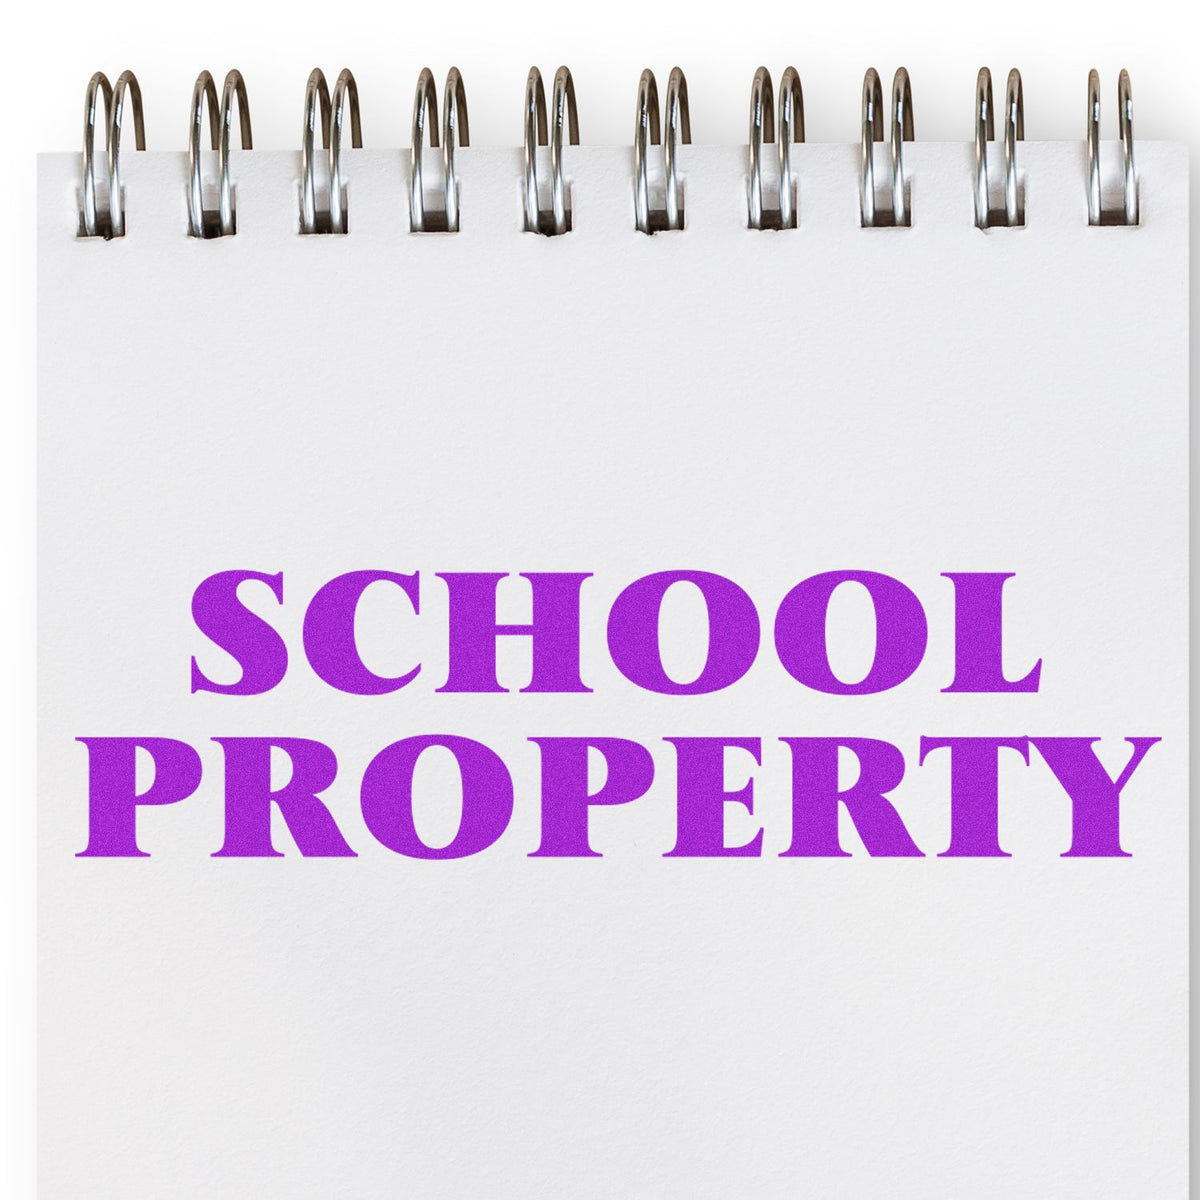 Large School Property Rubber Stamp In Use